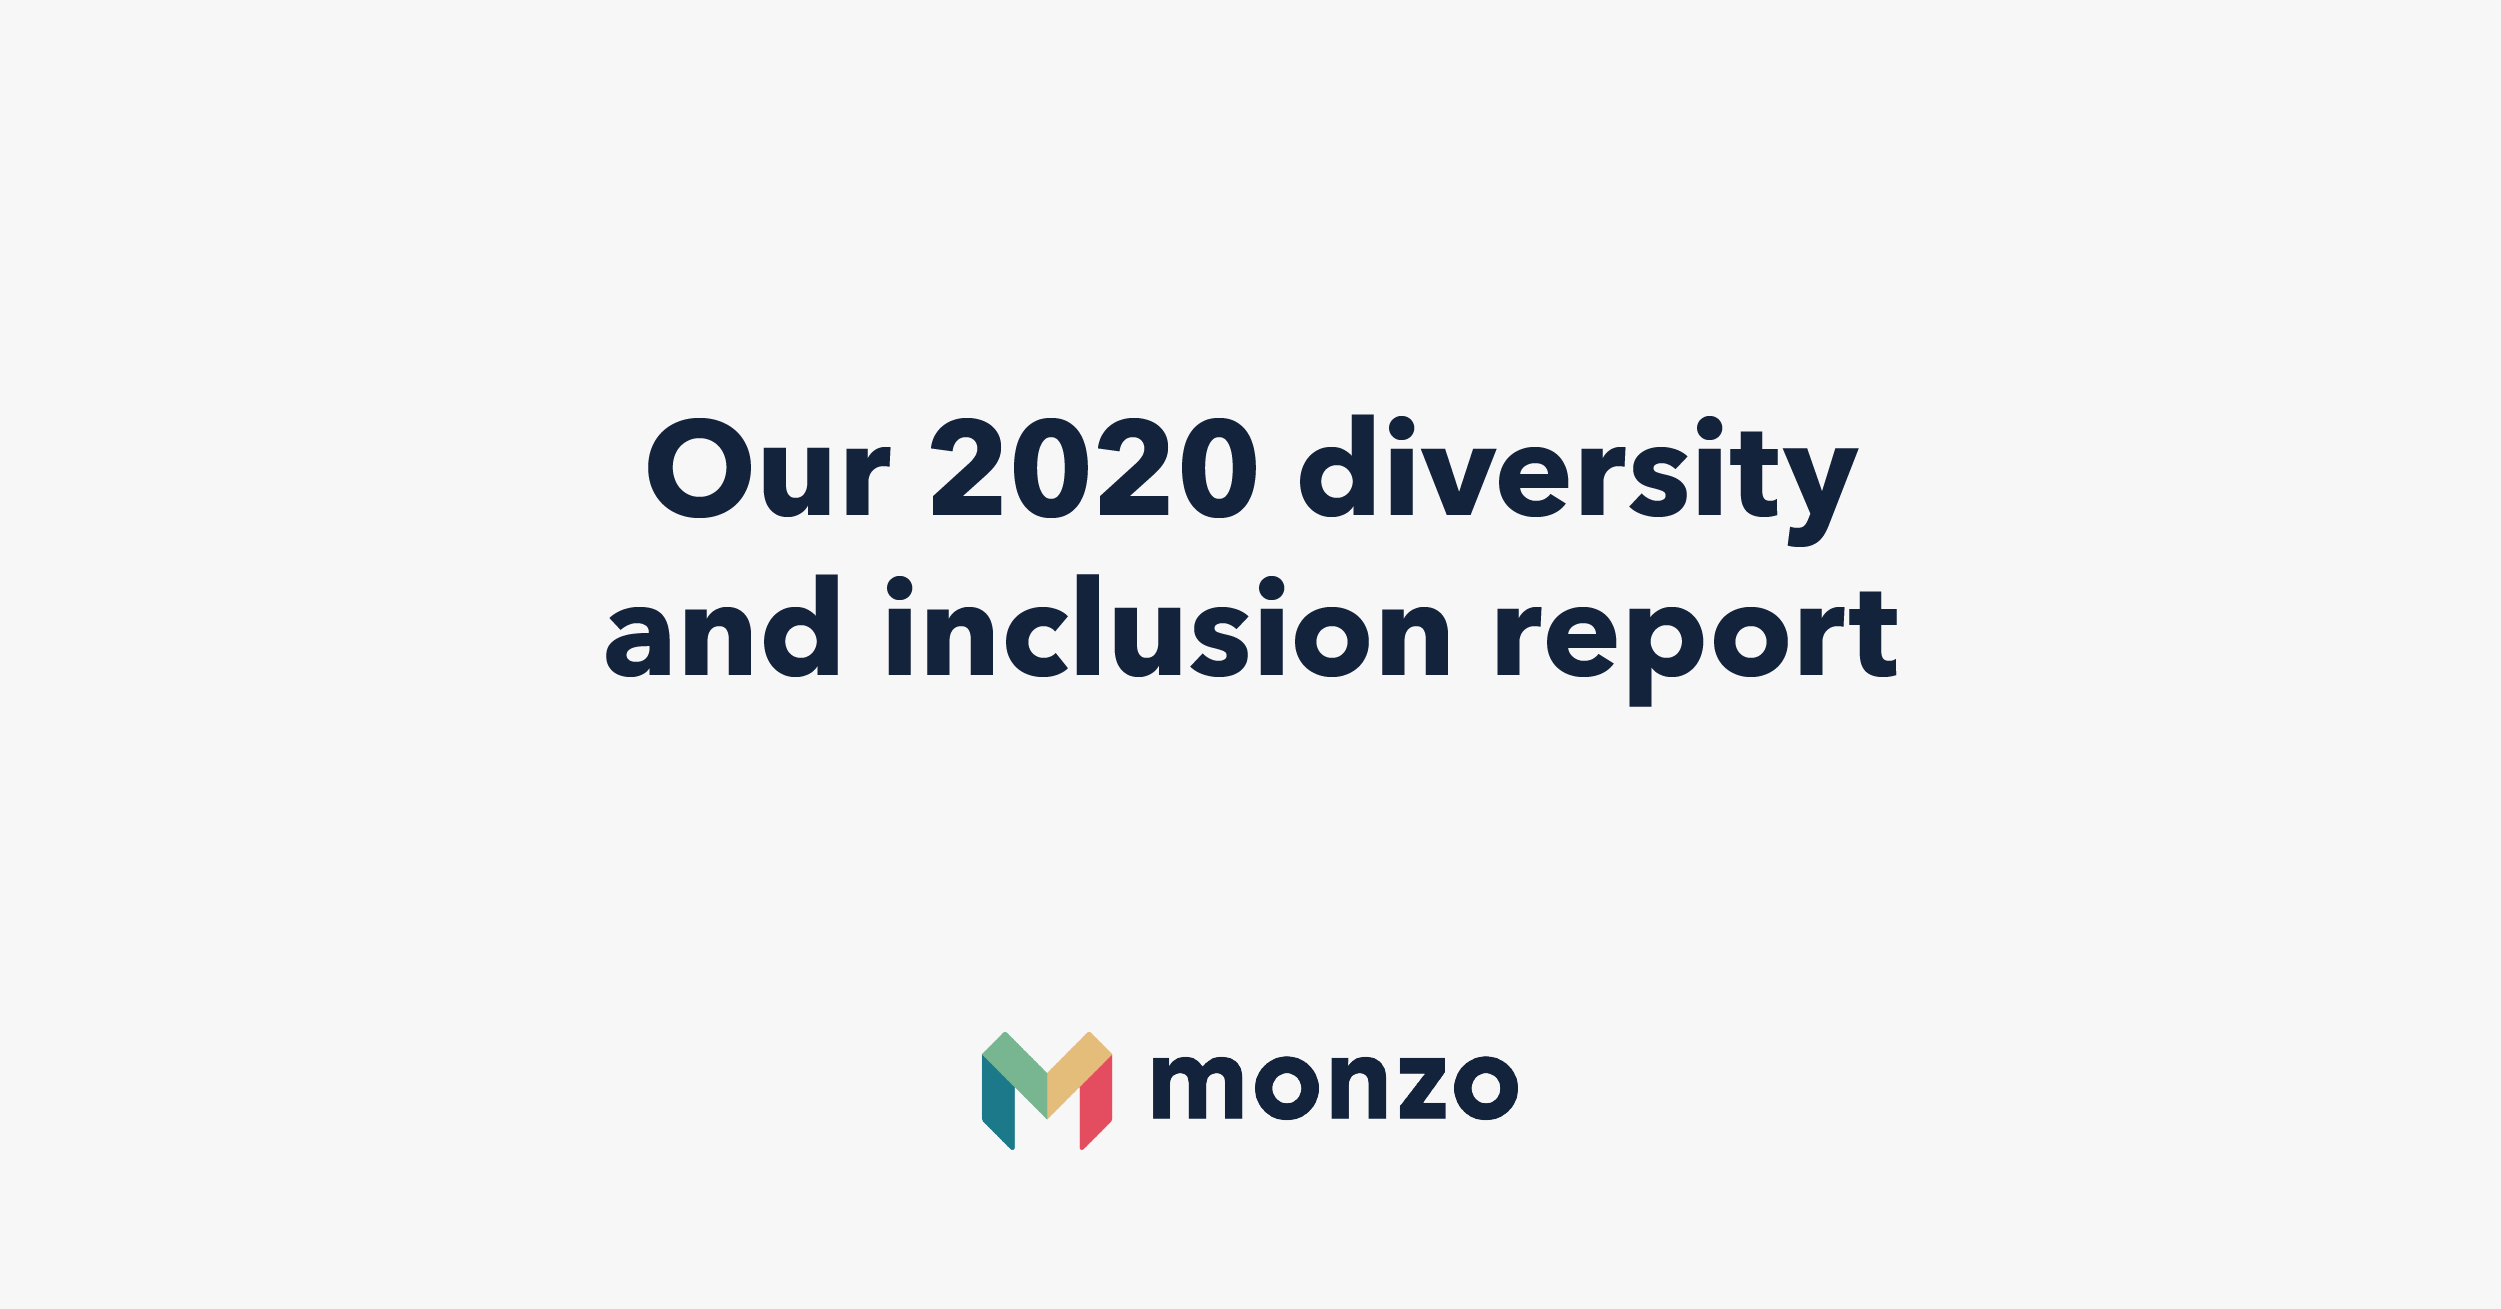 Our 2020 diversity and inclusion report